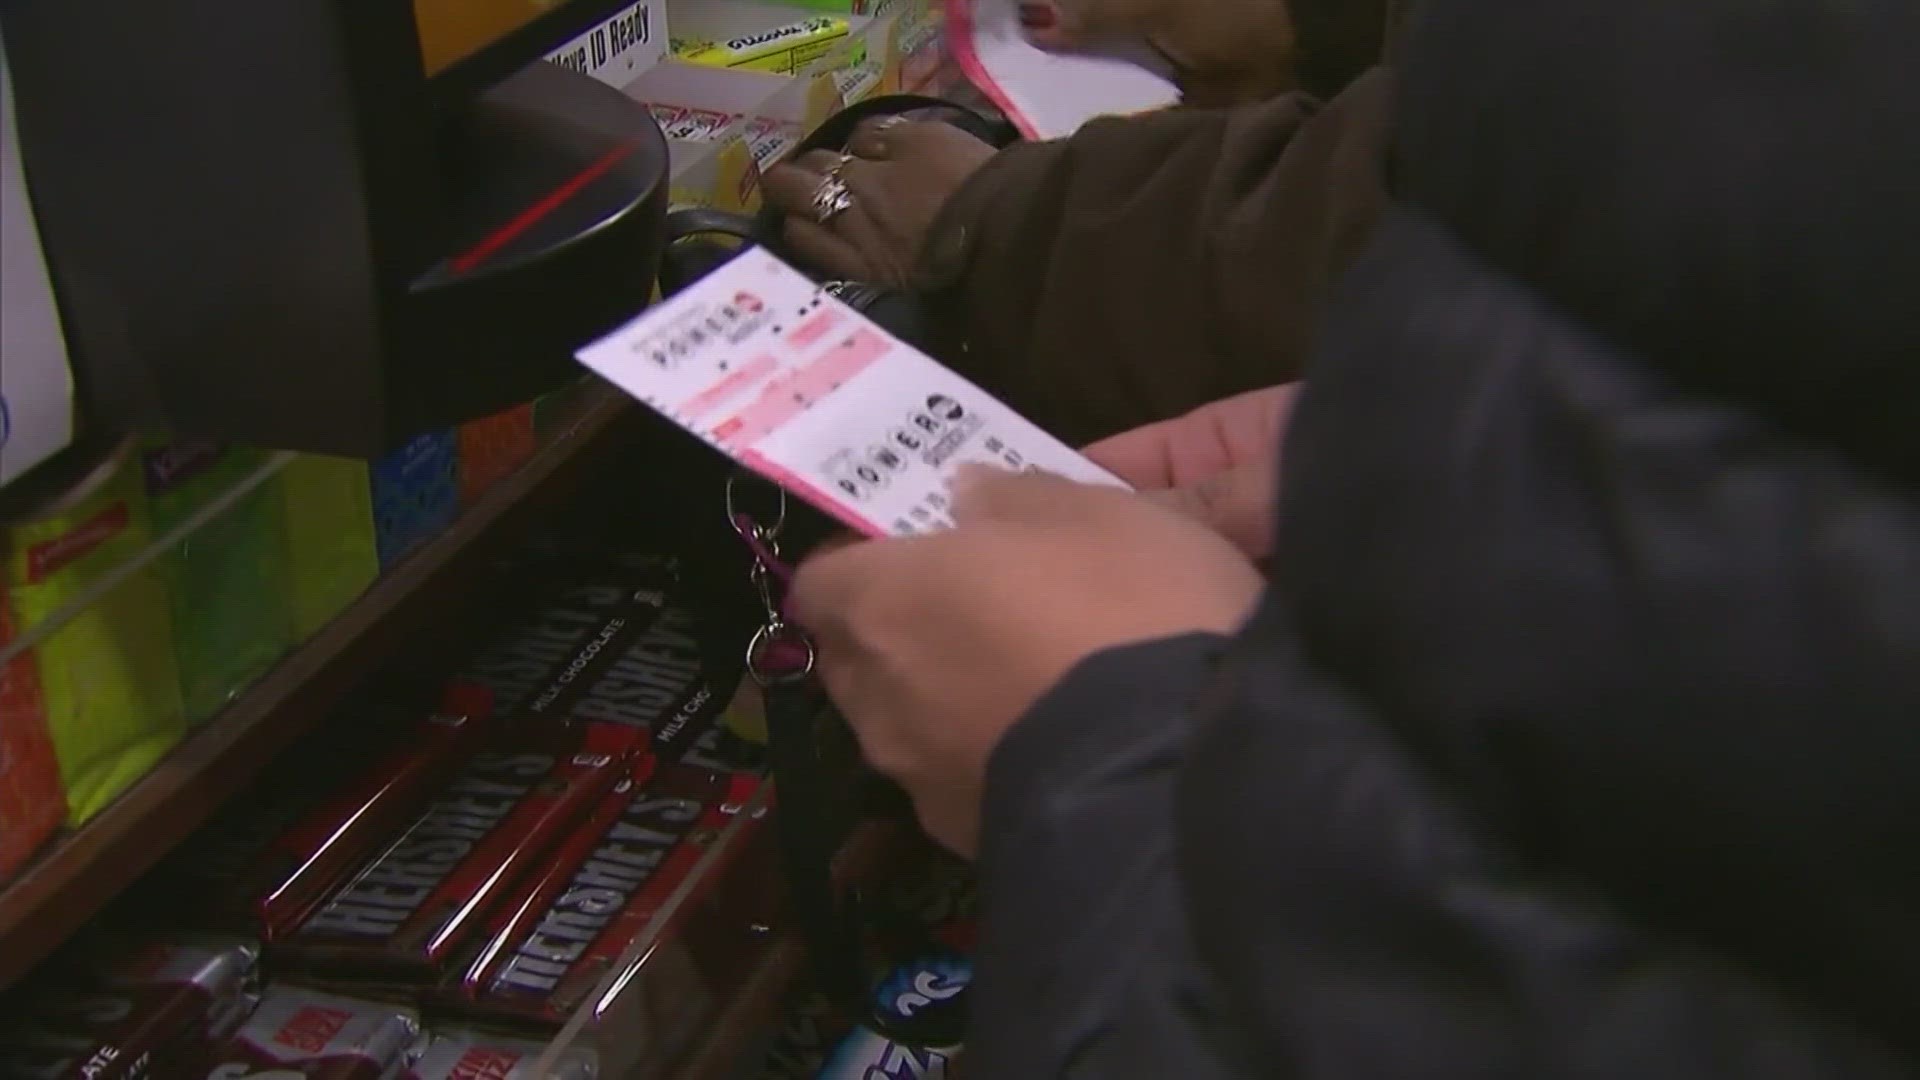 The next Powerball drawing is set for Saturday, December 30. The jackpot is $760 million.